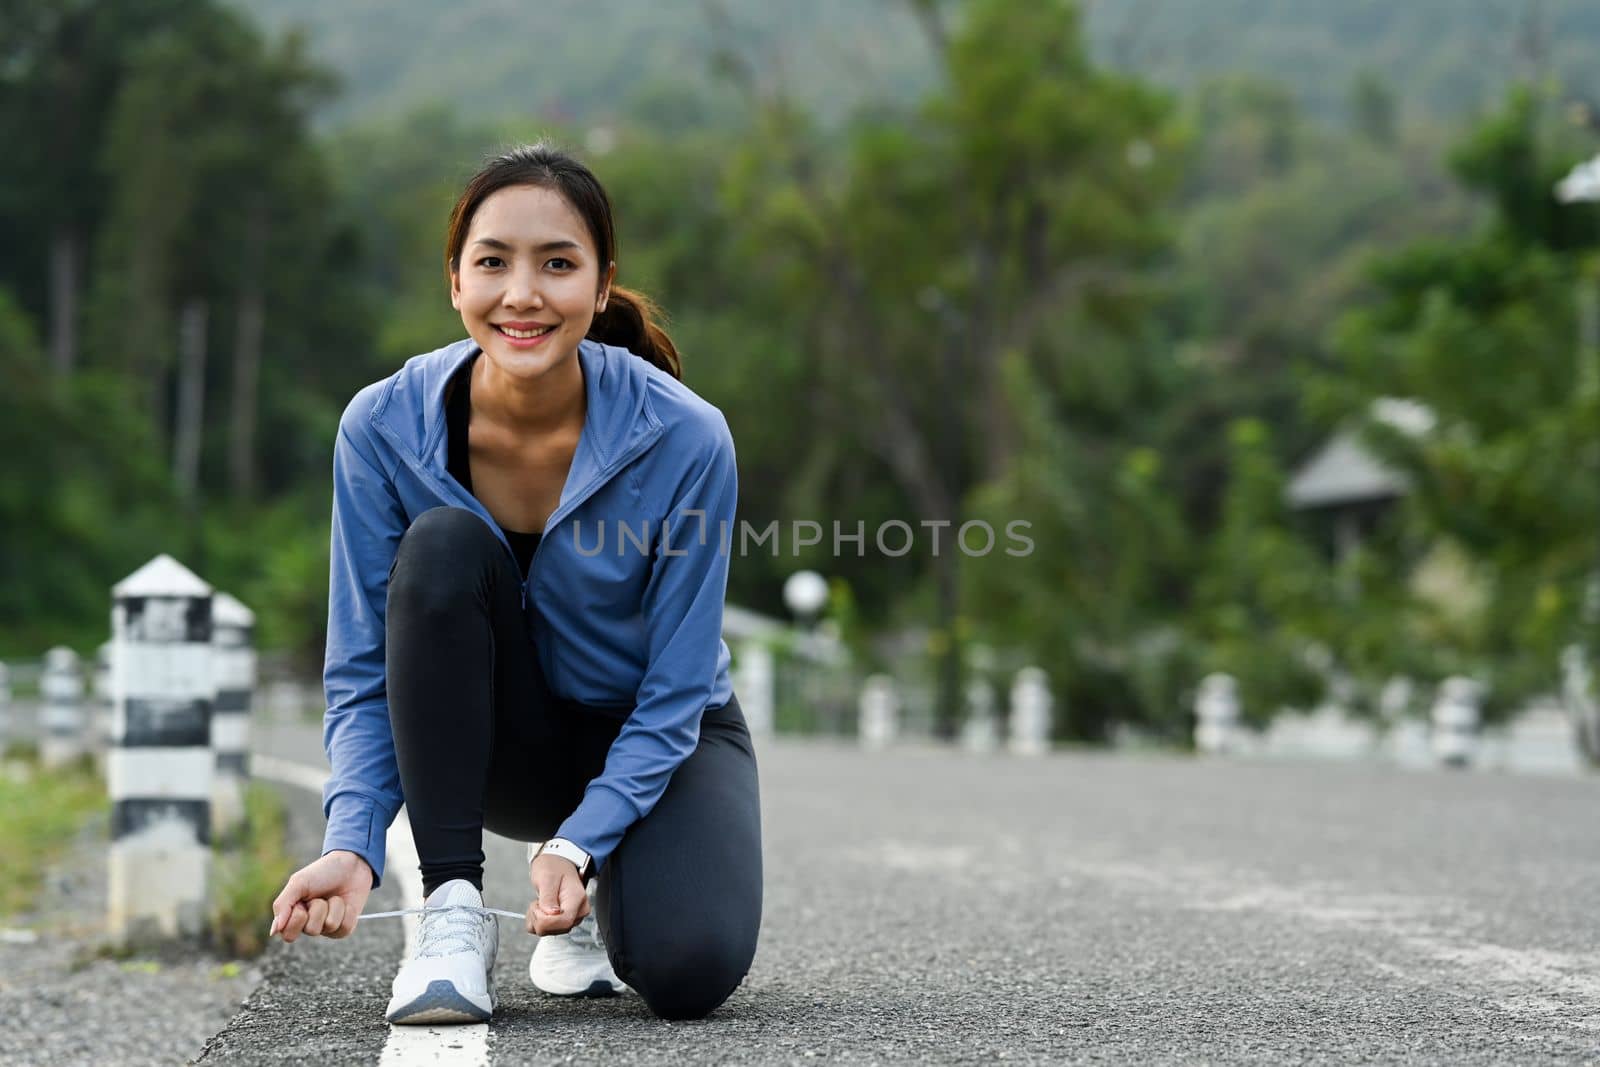 Smiling sportswoman tying shoelaces before running, getting ready for jogging outdoors. Healthy lifestyle concept.